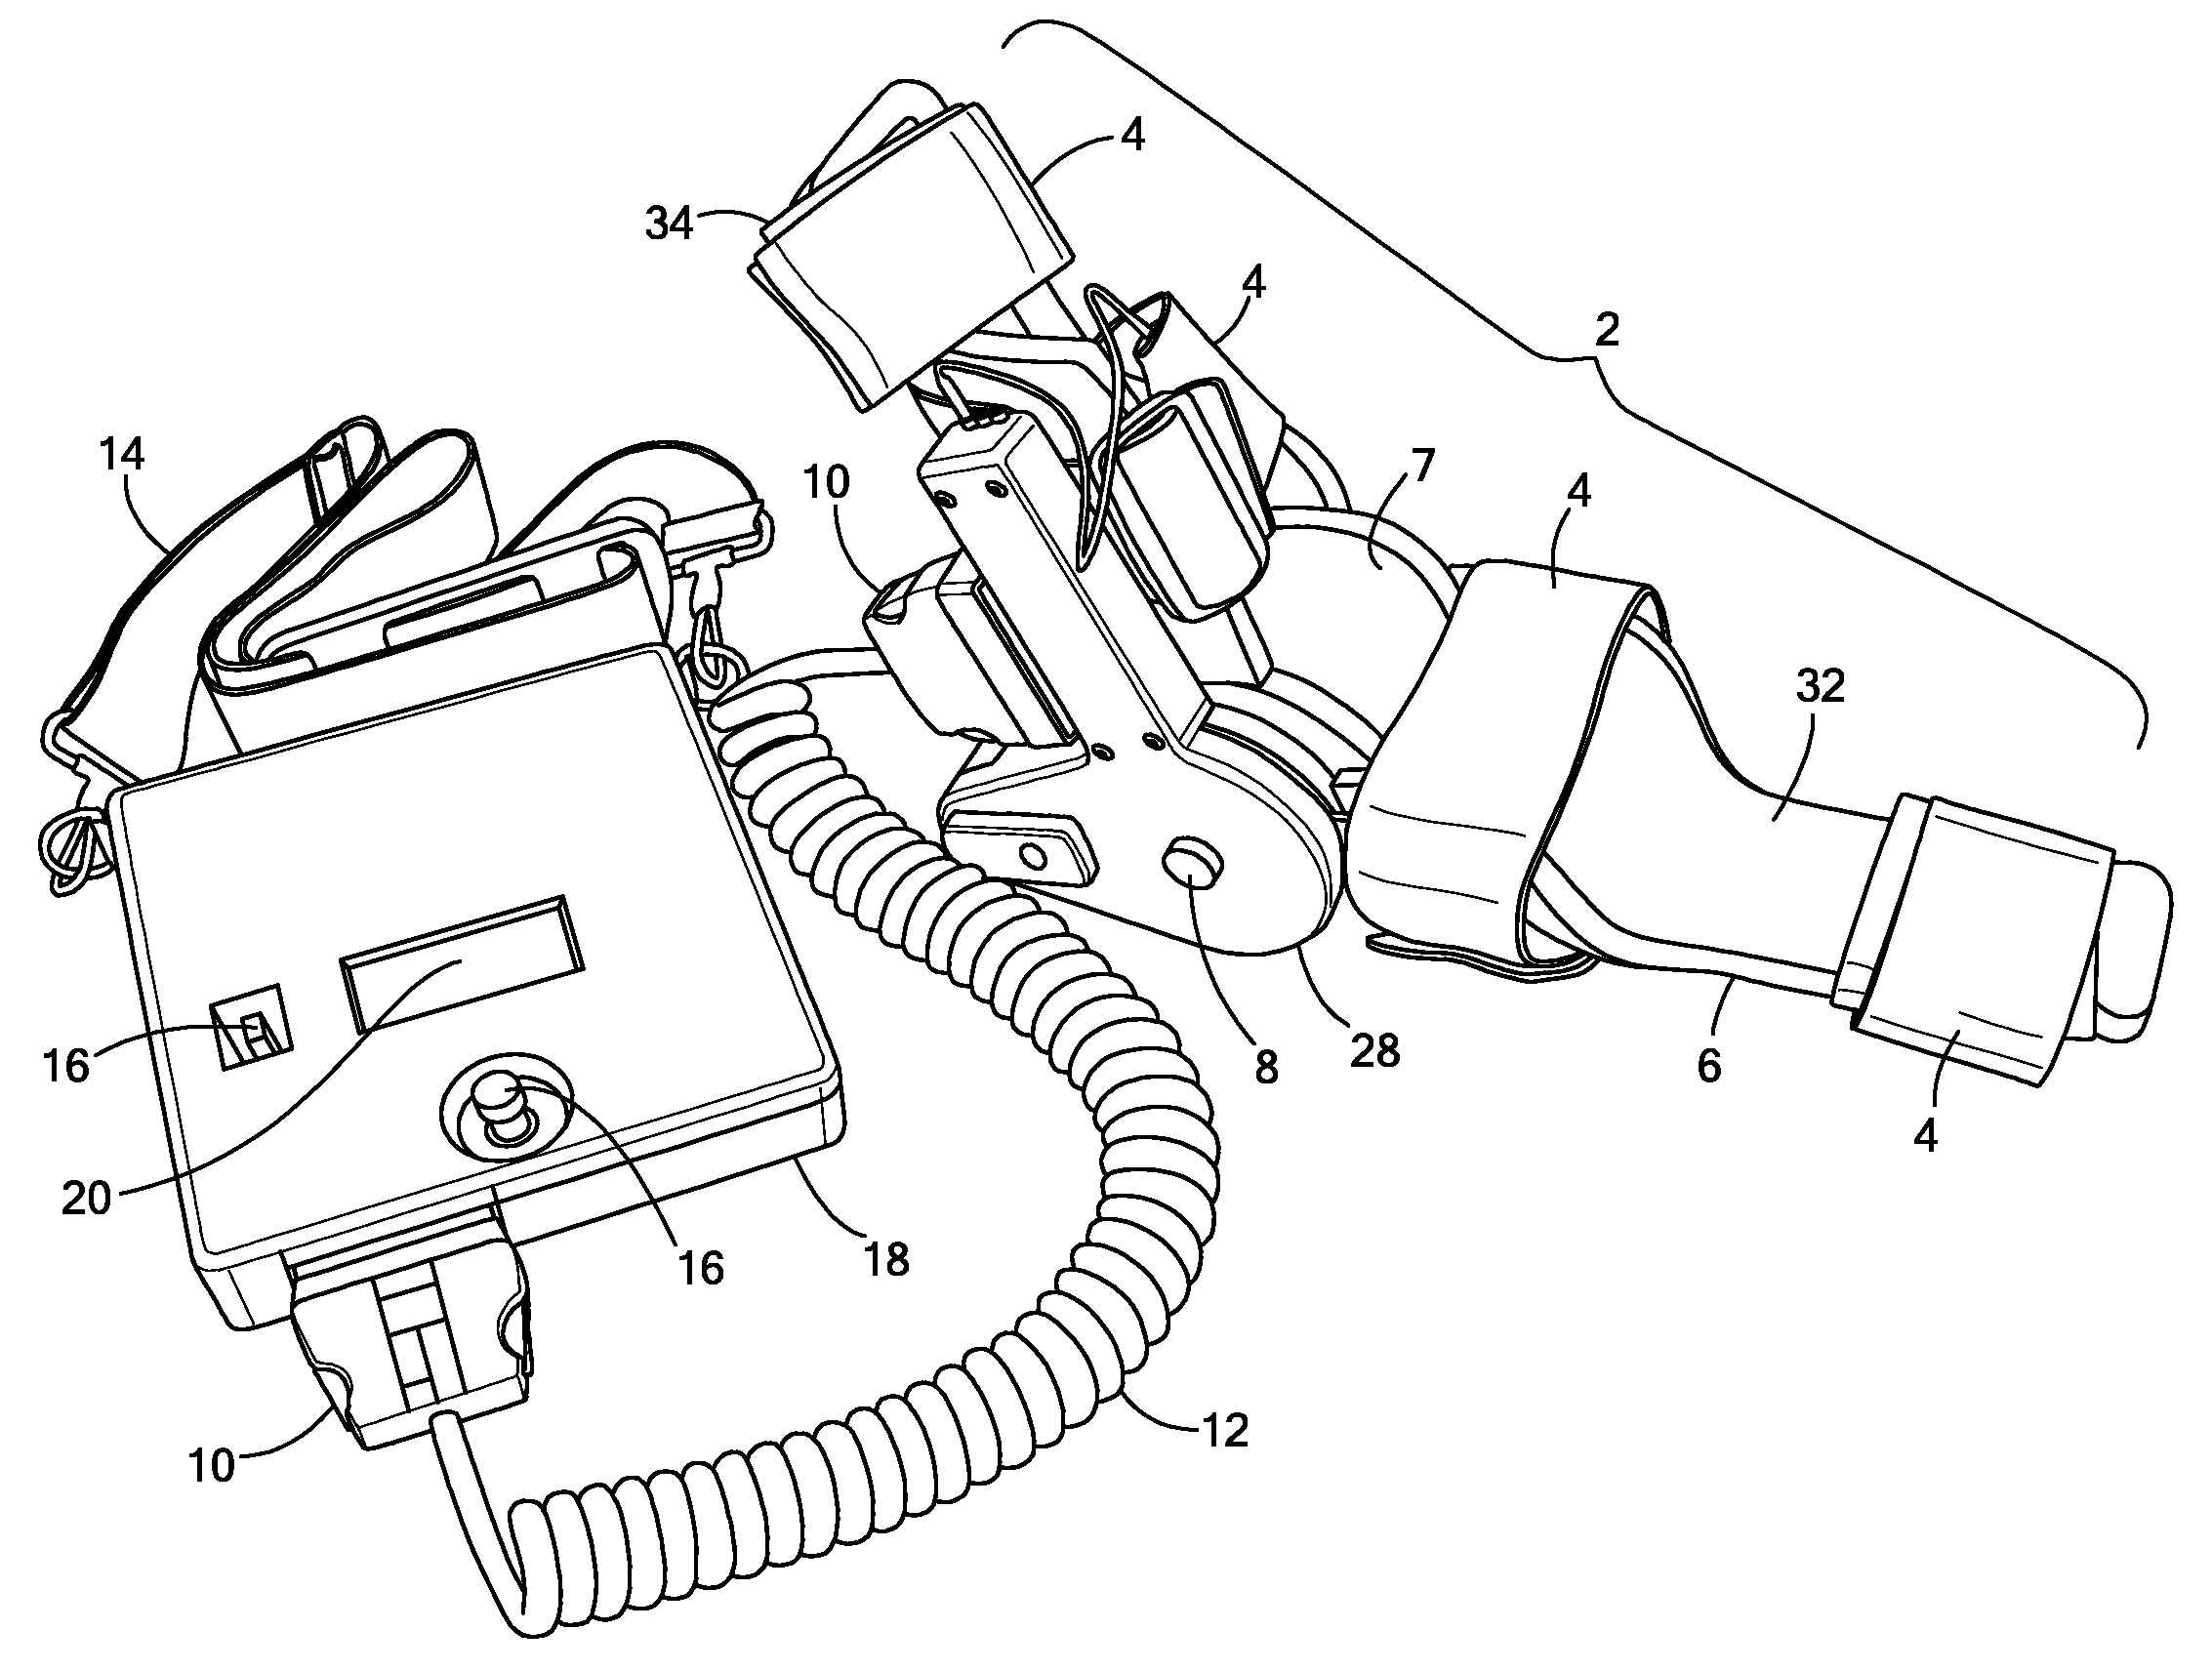 Powered Orthotic Device and Method of Using Same